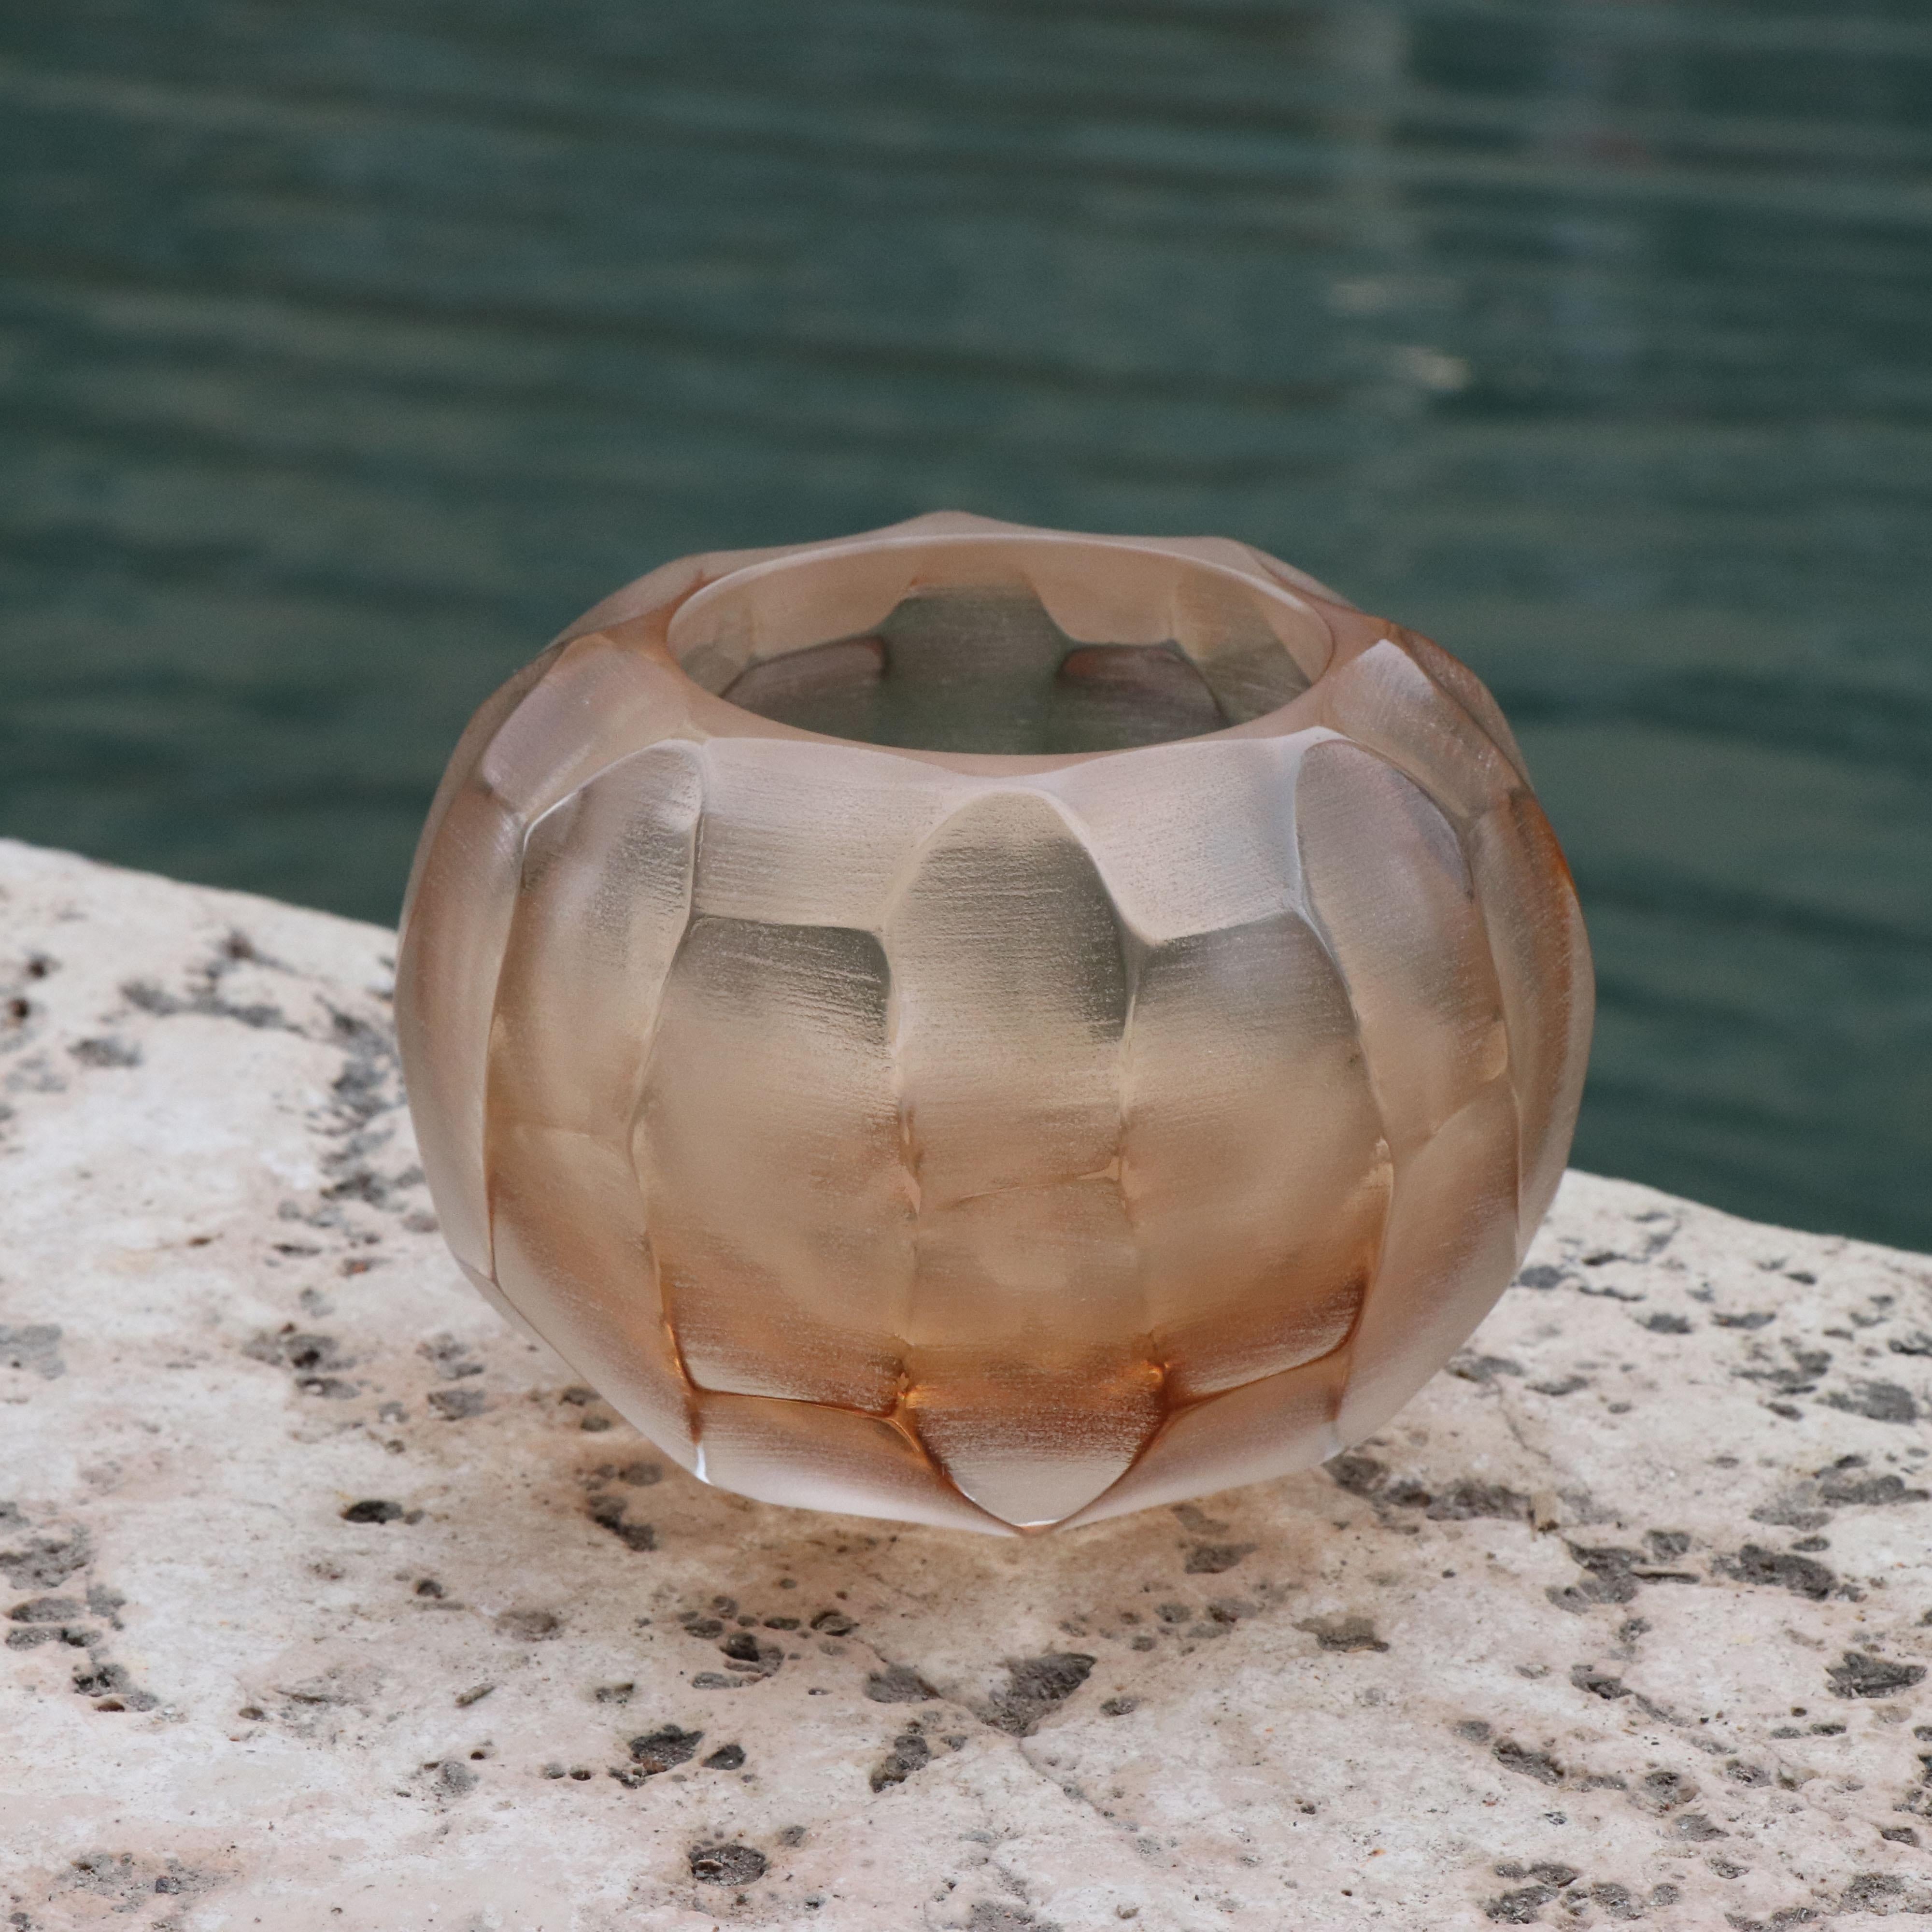 This small vase is called Bocia - a word from the Venetian dialect which means ‘little one’. Its round shape is achieved by first mouth blowing the molten glass. Once cooled the surface is finished with carving and polishing techniques revealing